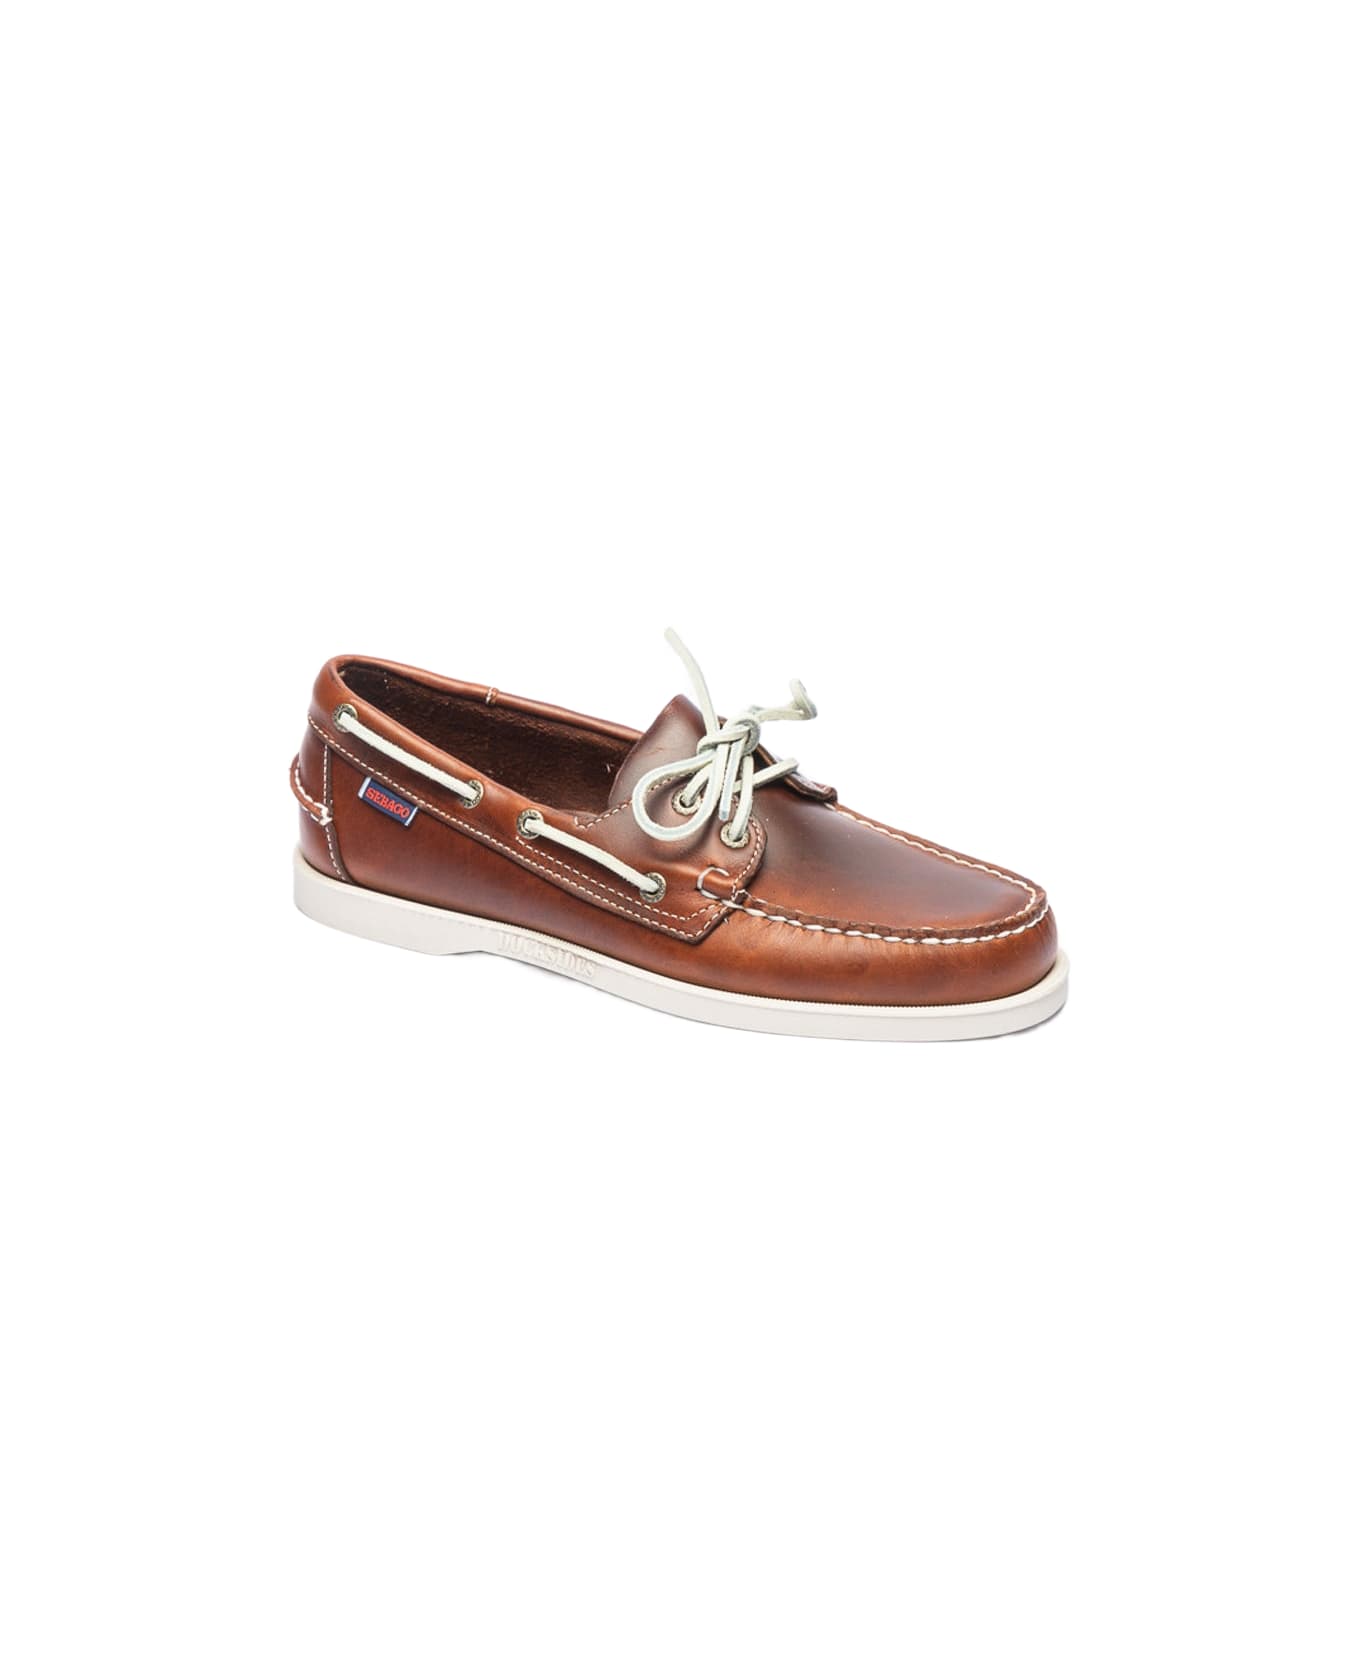 Sebago Docksides Brown Waxed Leather Loafer - Cognac ローファー＆デッキシューズ